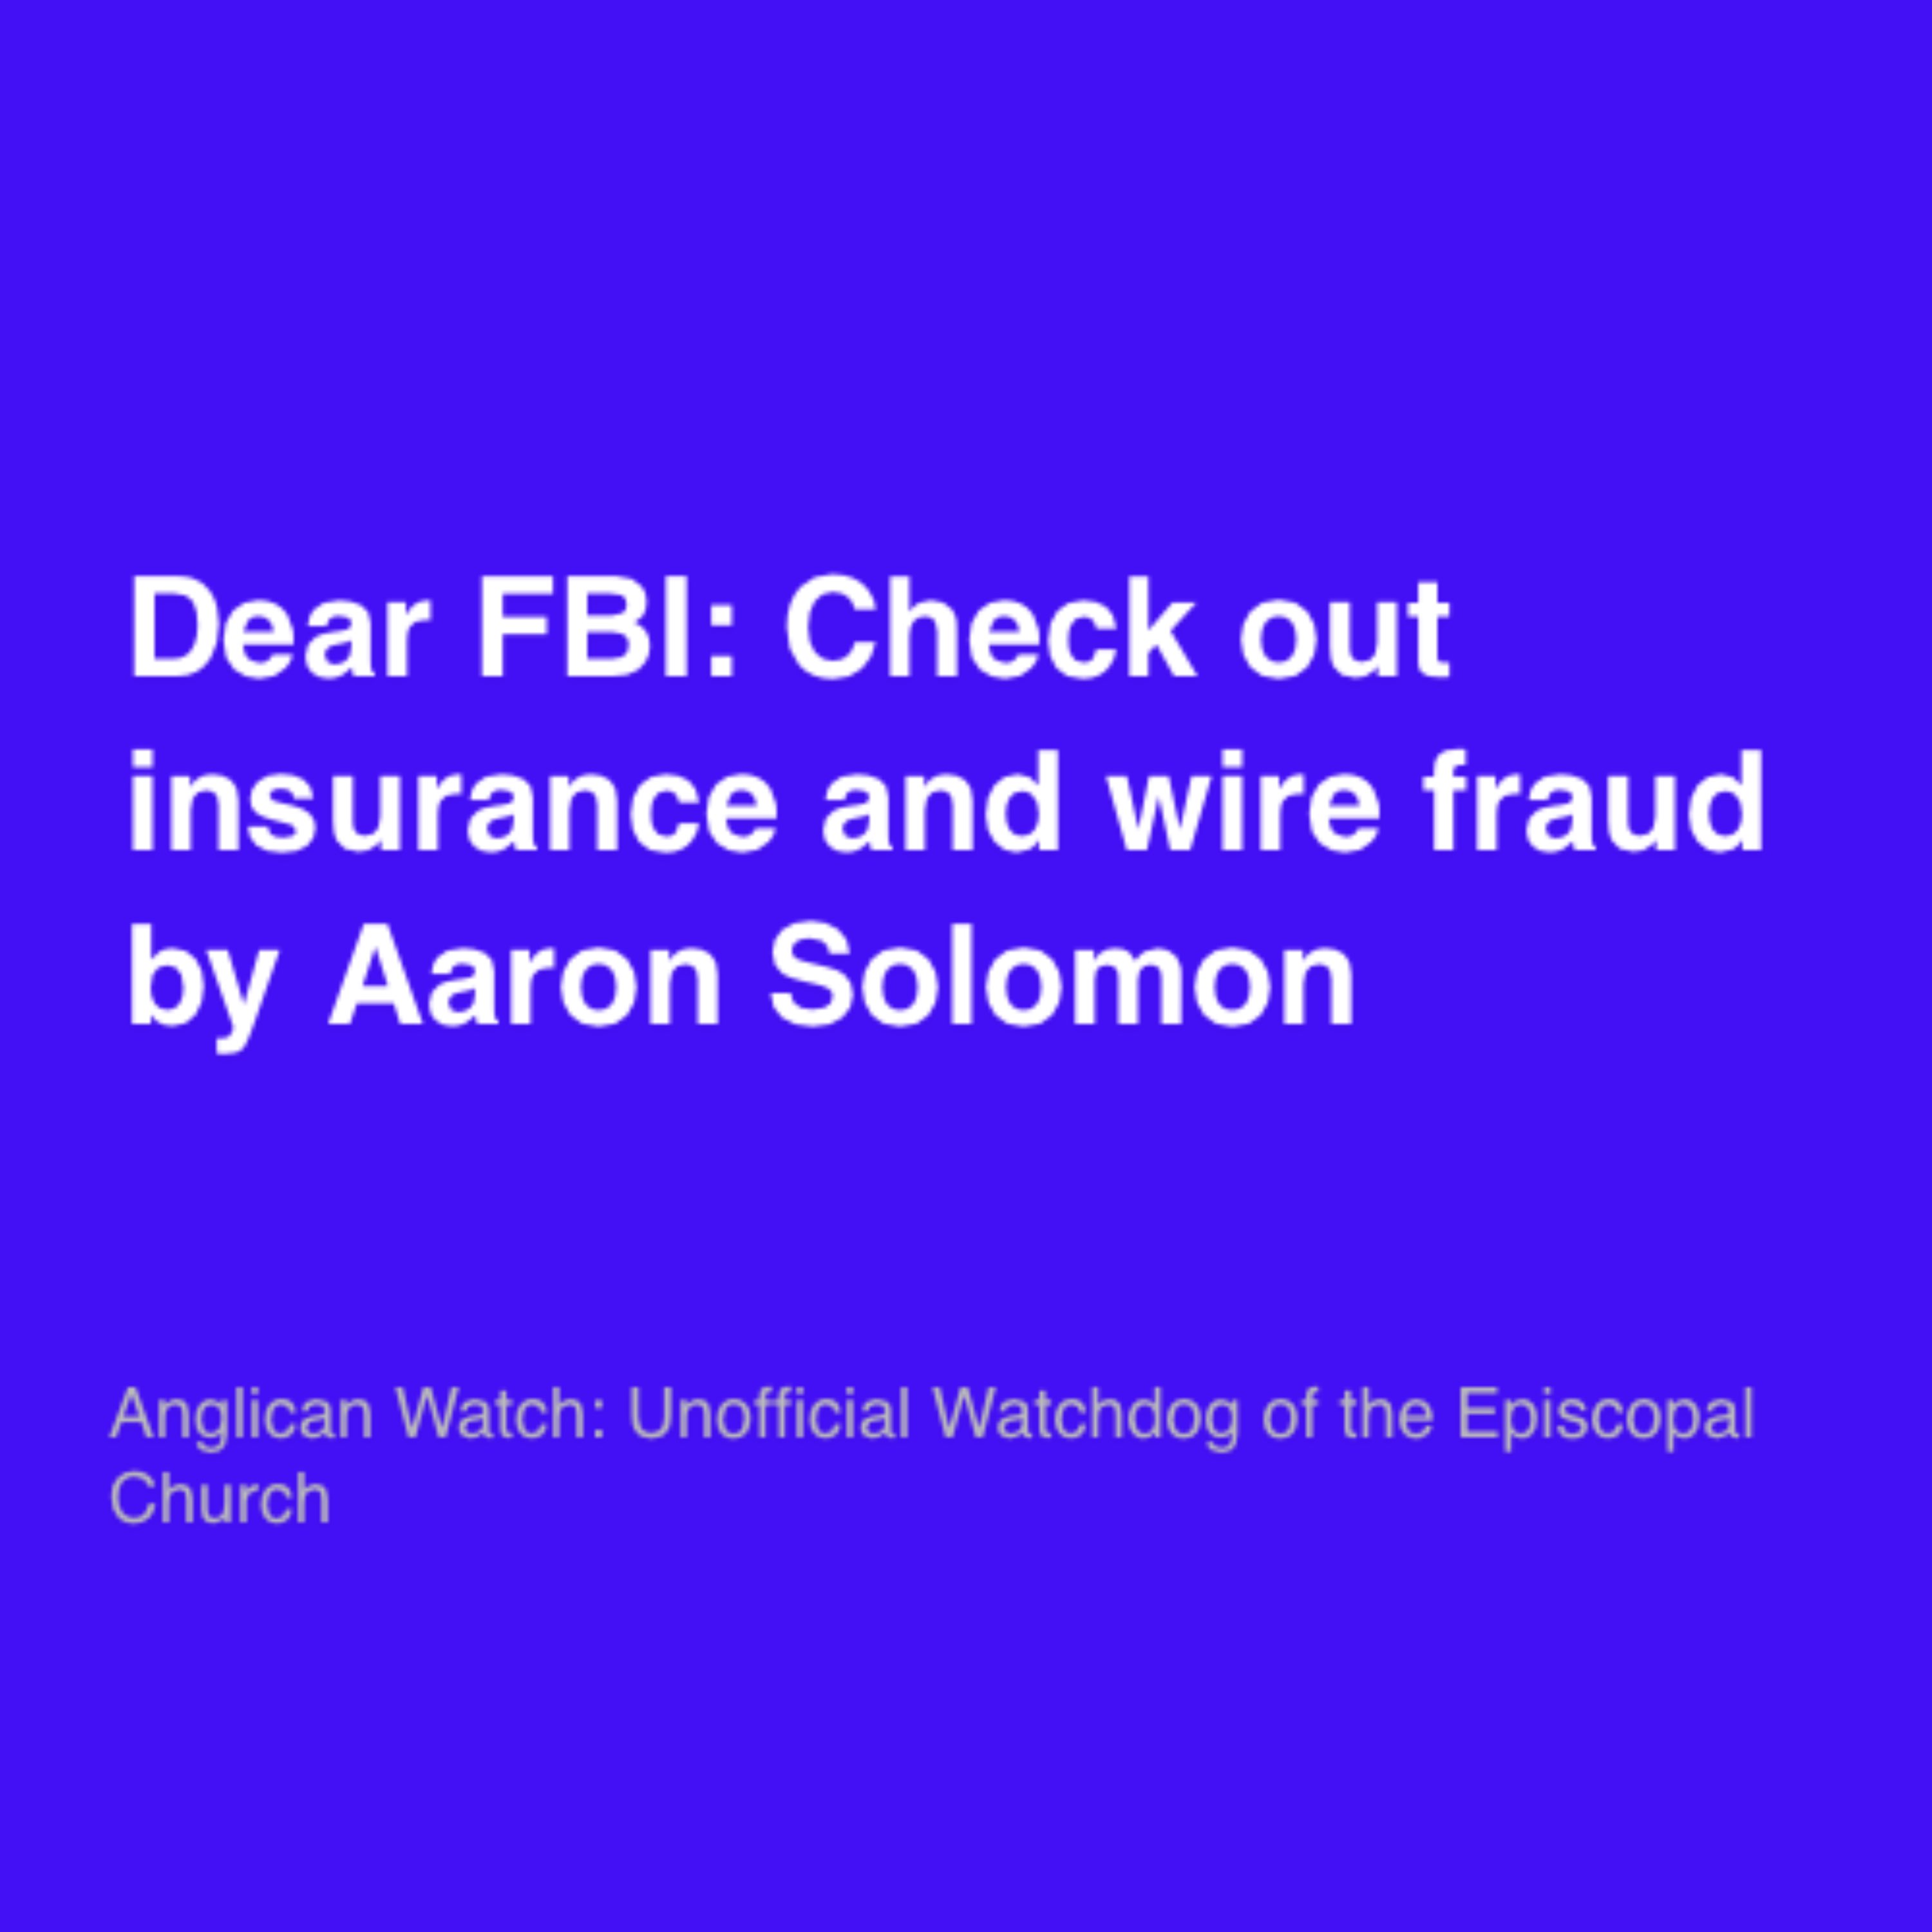 Dear FBI: Check out insurance and wire fraud by Aaron Solomon